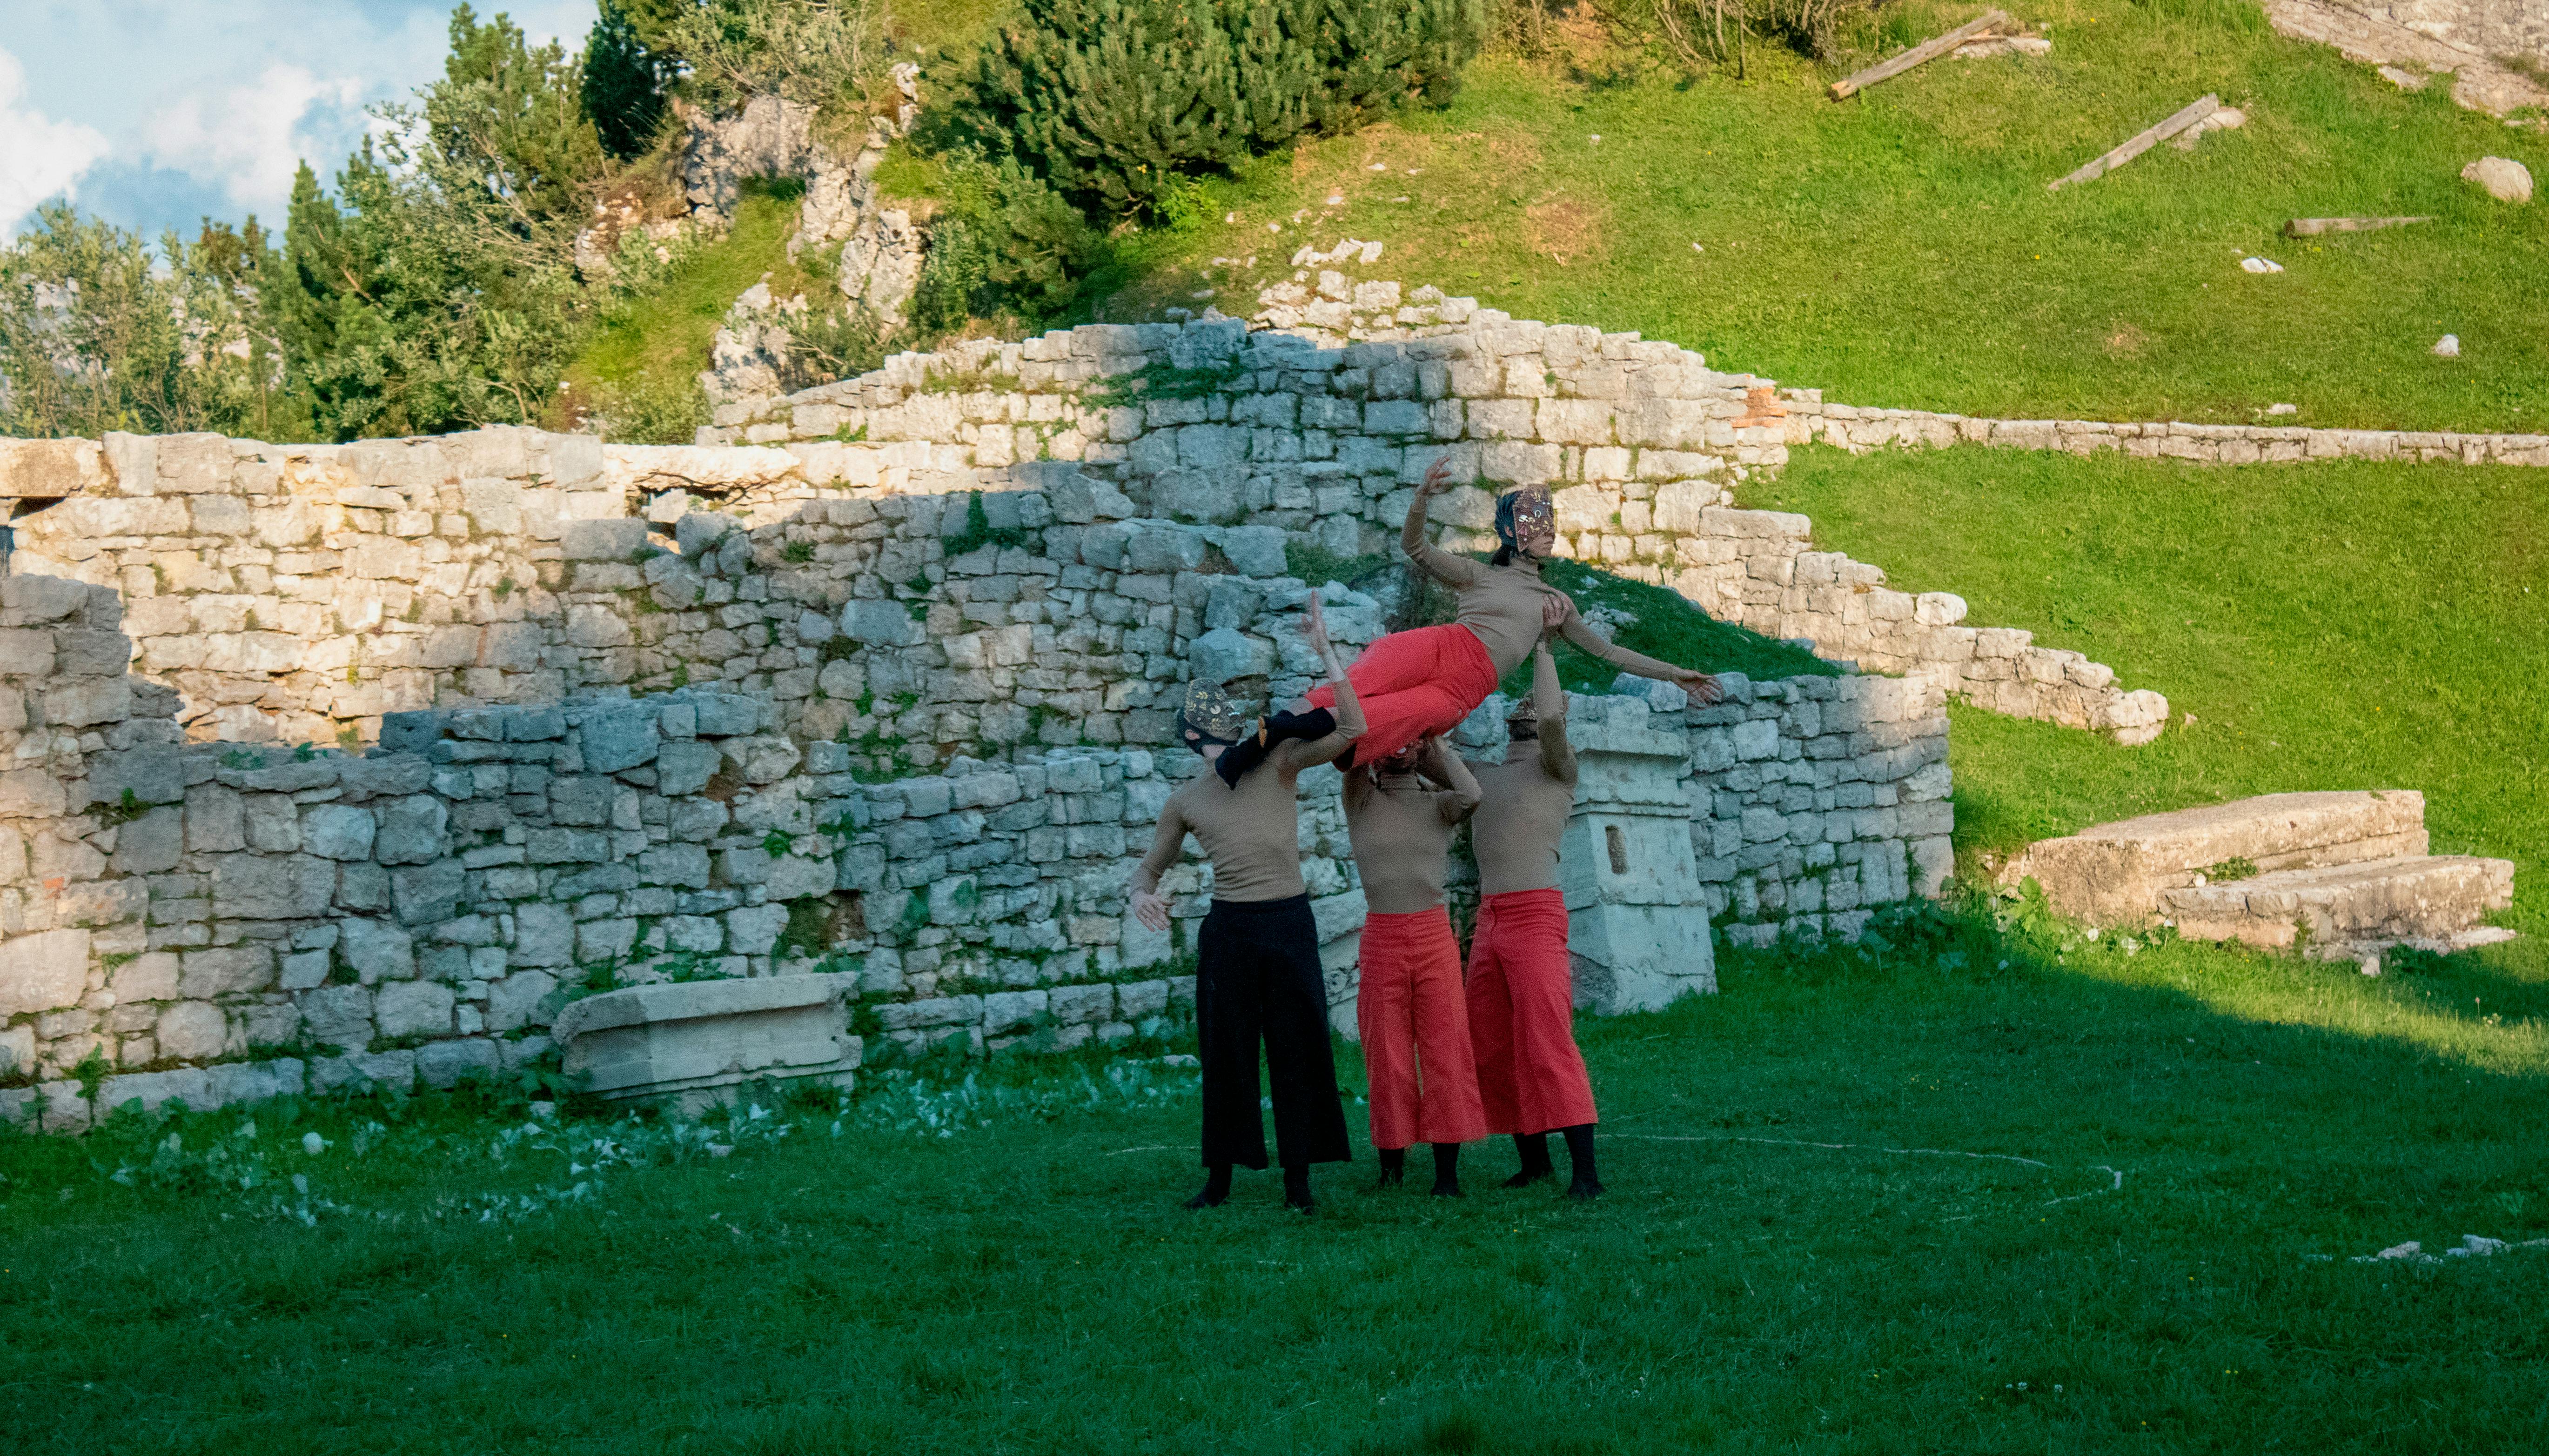 Four performers on a field; one of them is lifted up by the others. They wear masks over their faces. Behind them we see stone ruins and the slope of a hill. It's daytime.